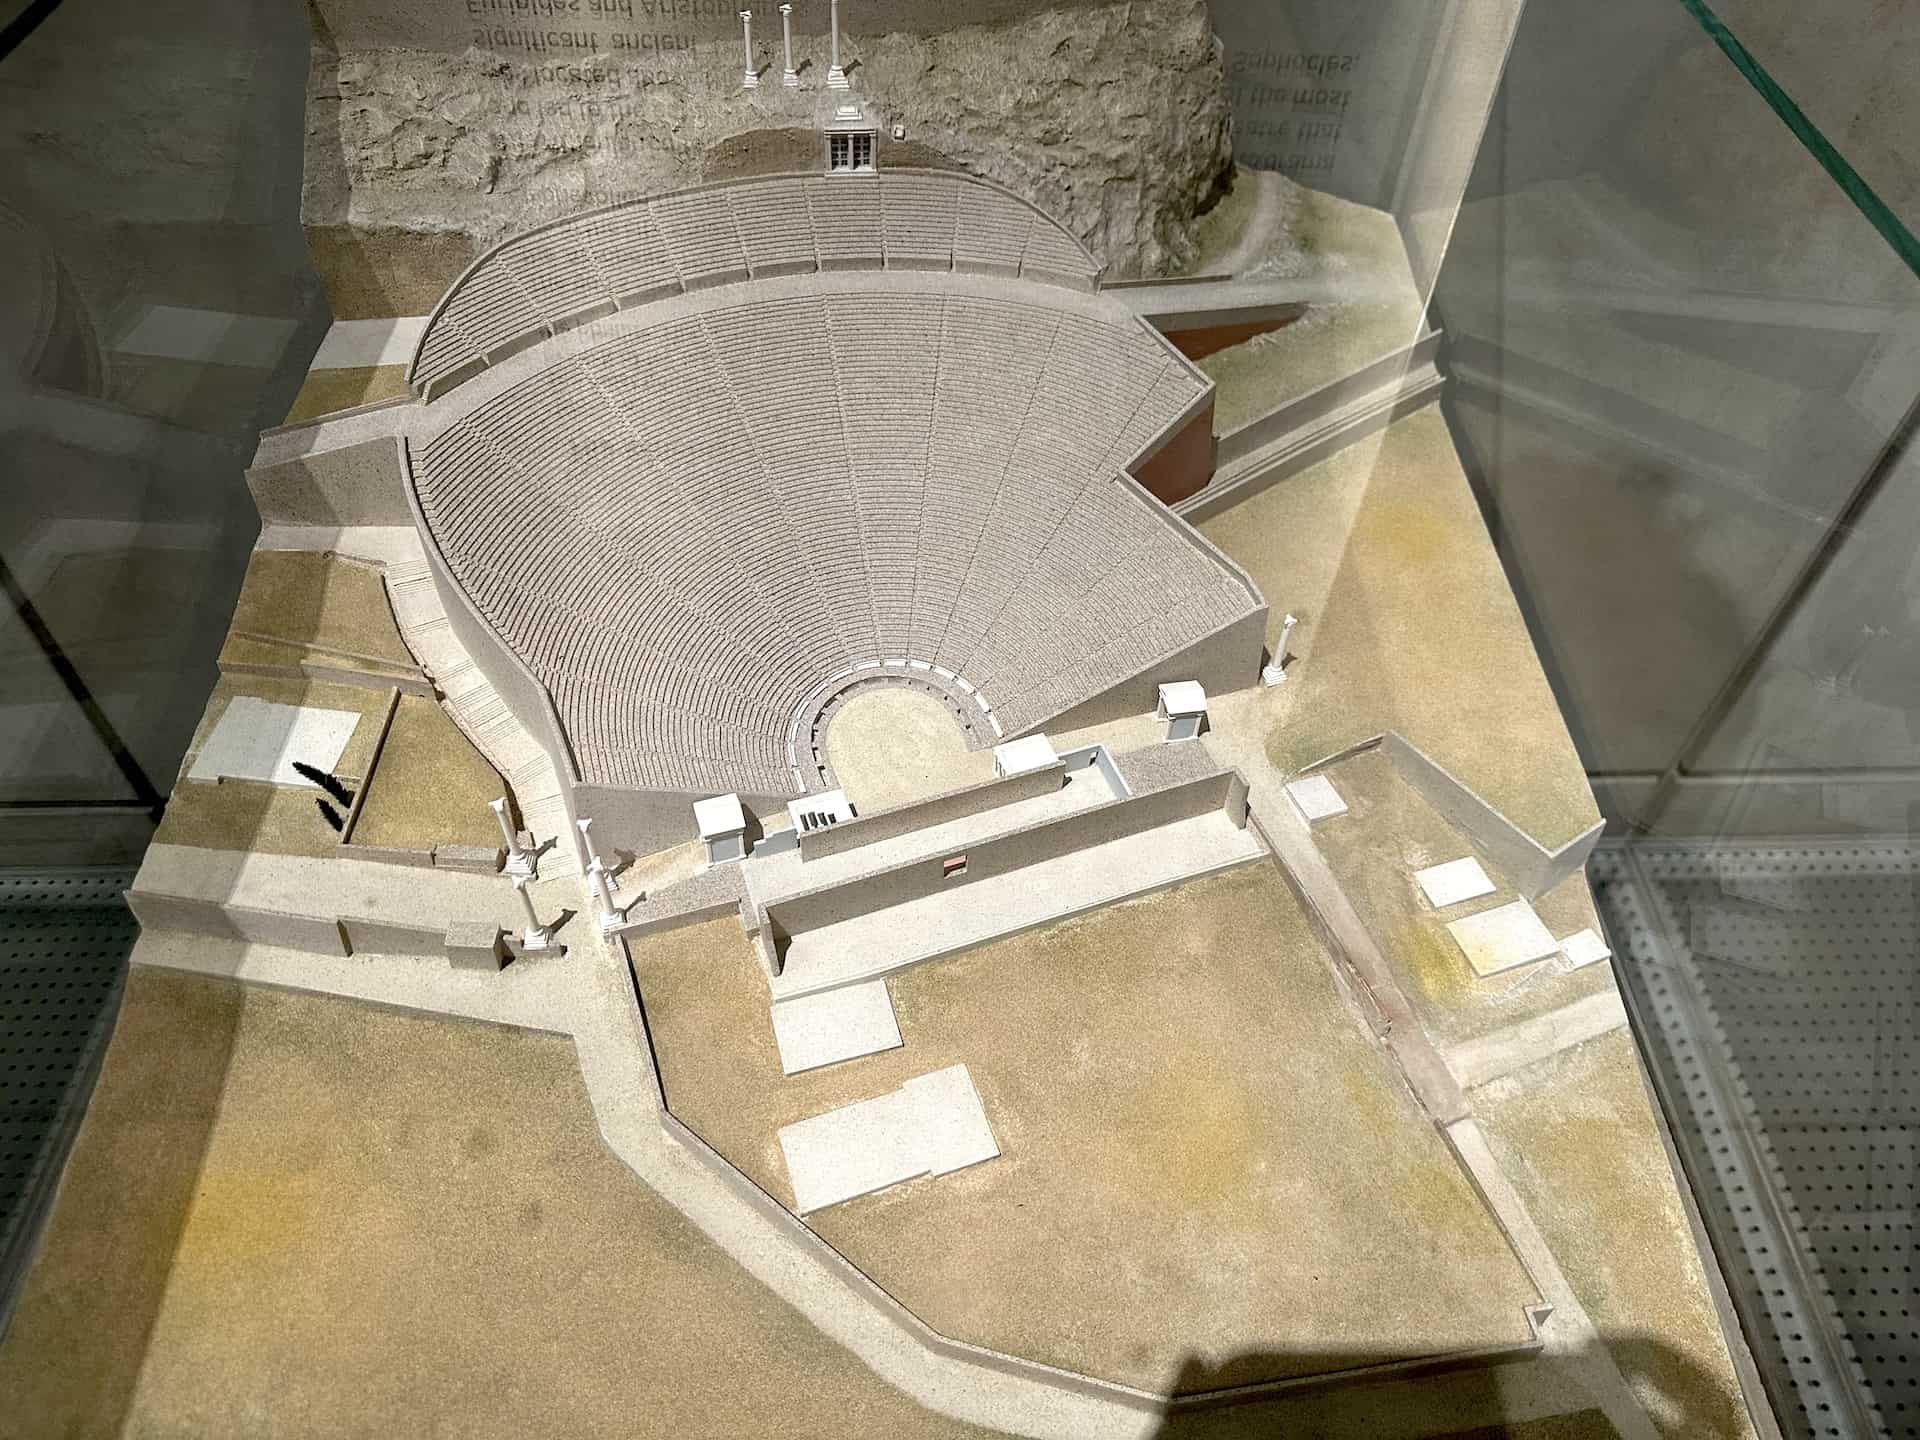 Model of the Sanctuary and Theatre of Dionysus